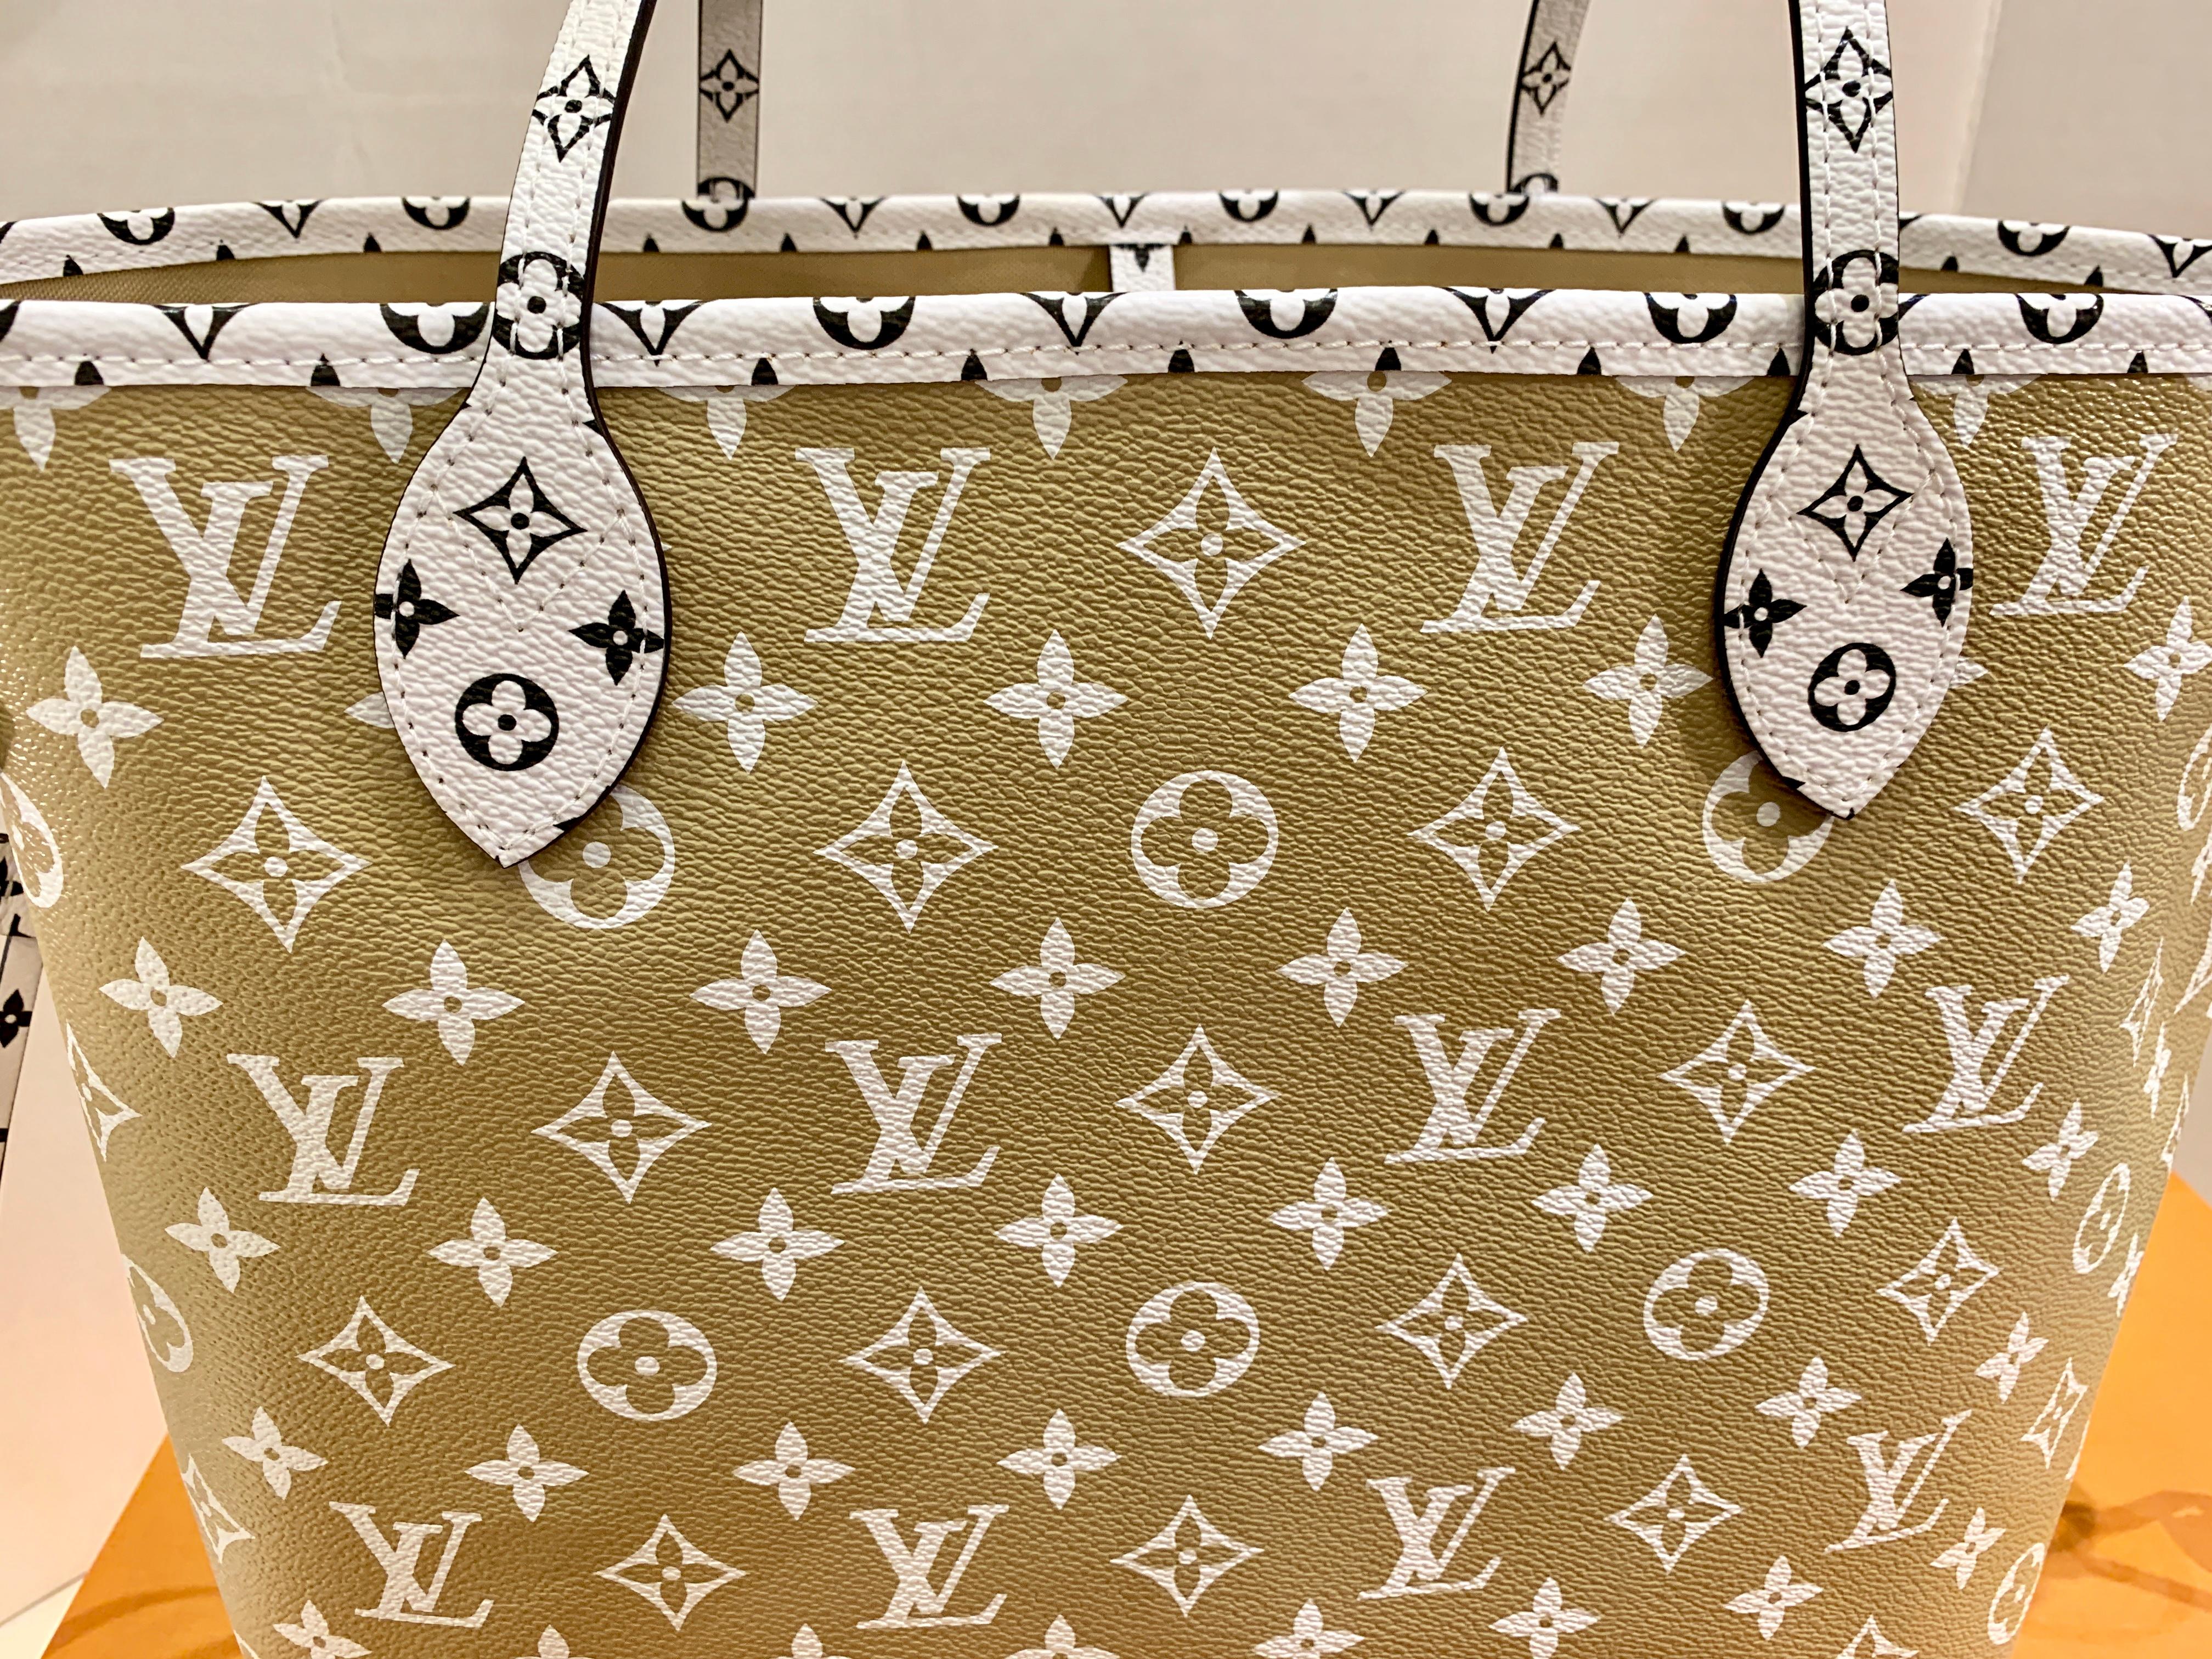 Get the newest and latest bag thousands of women are waiting for that is Sold Out!  Brand new and never used, with all tags and packaging.

From the Louis Vuitton website, 